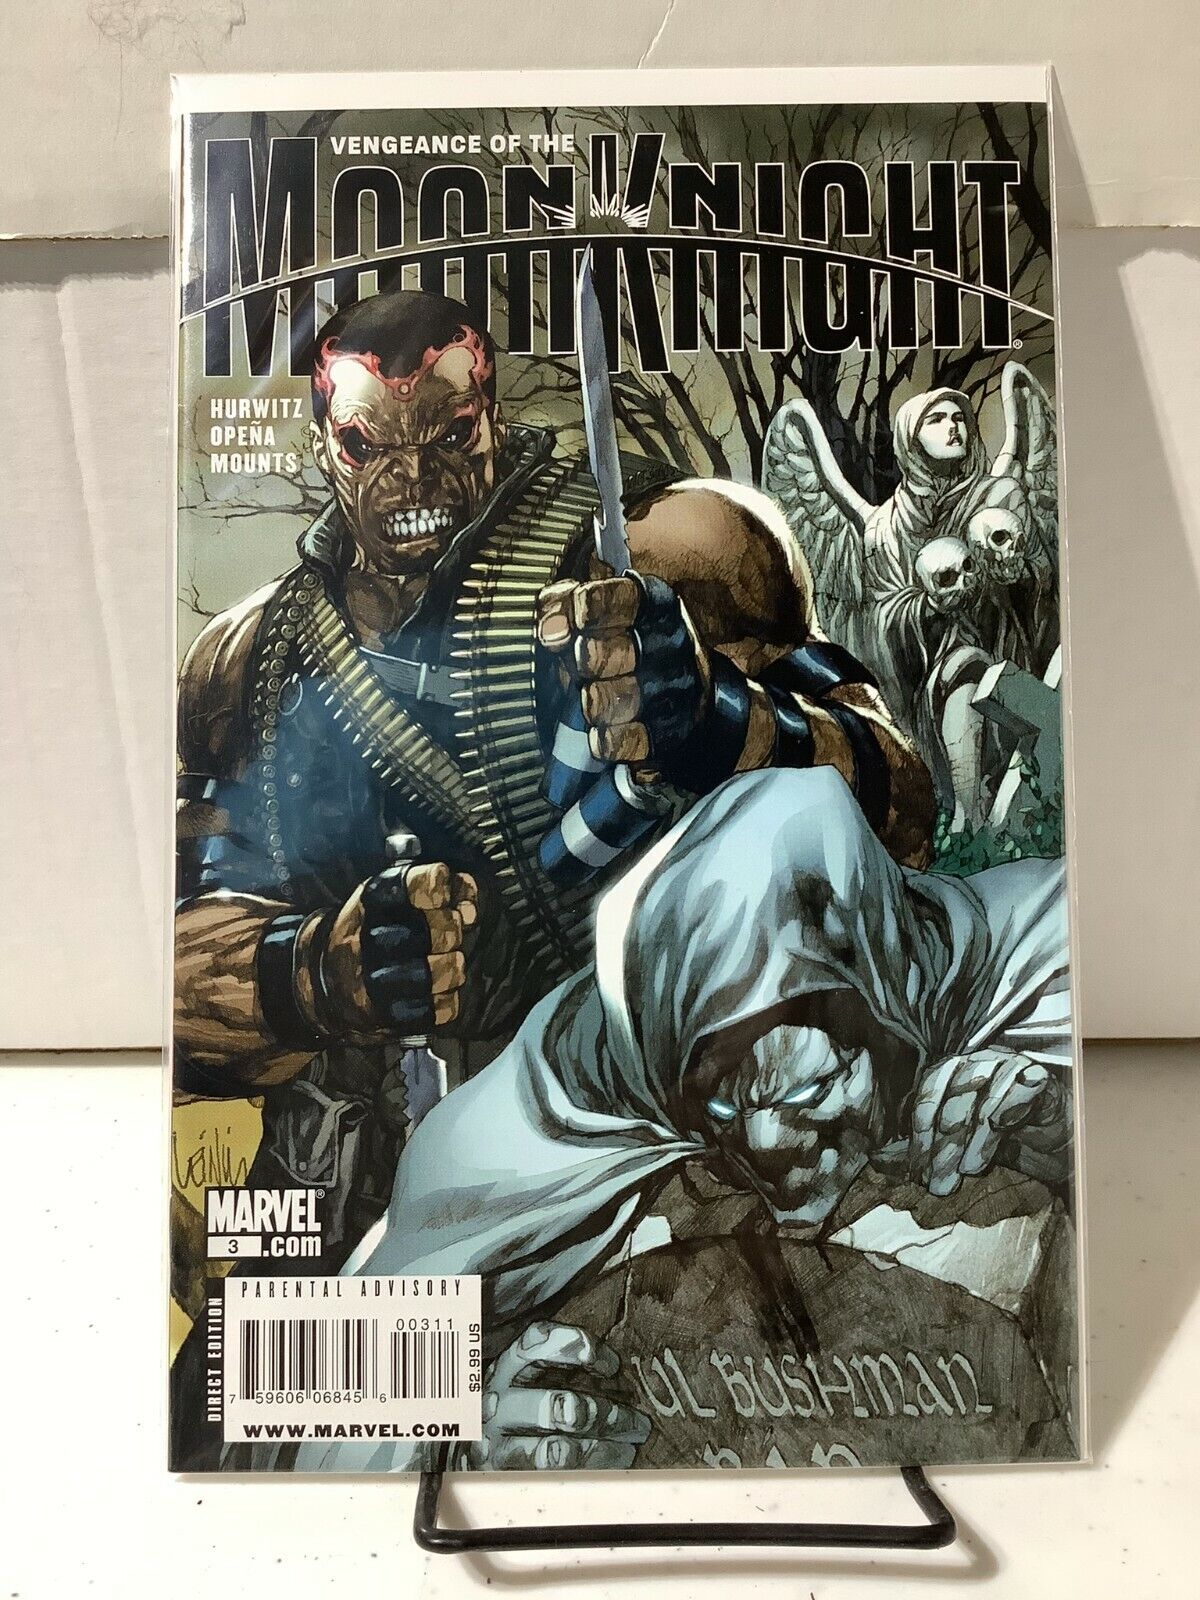 Vengeance of the Moon Knight #3 - VF-NM Unread Unopened - Combined Shipping